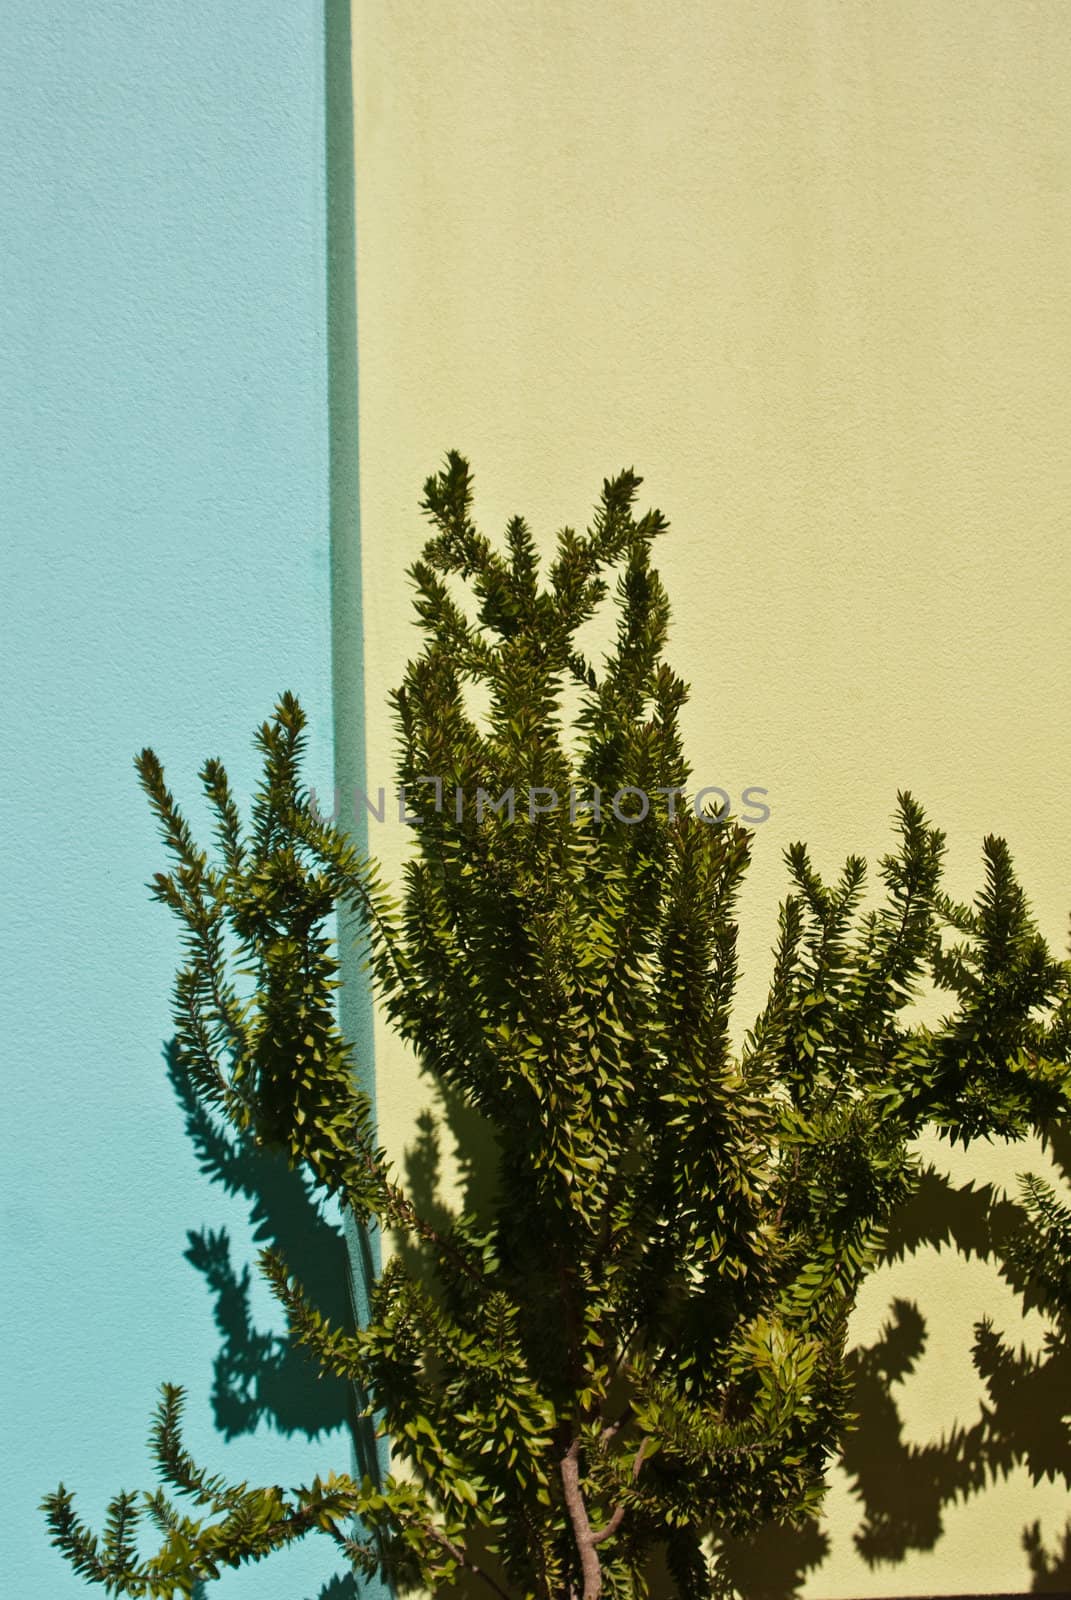 Two Tone Wall with Bush by emattil